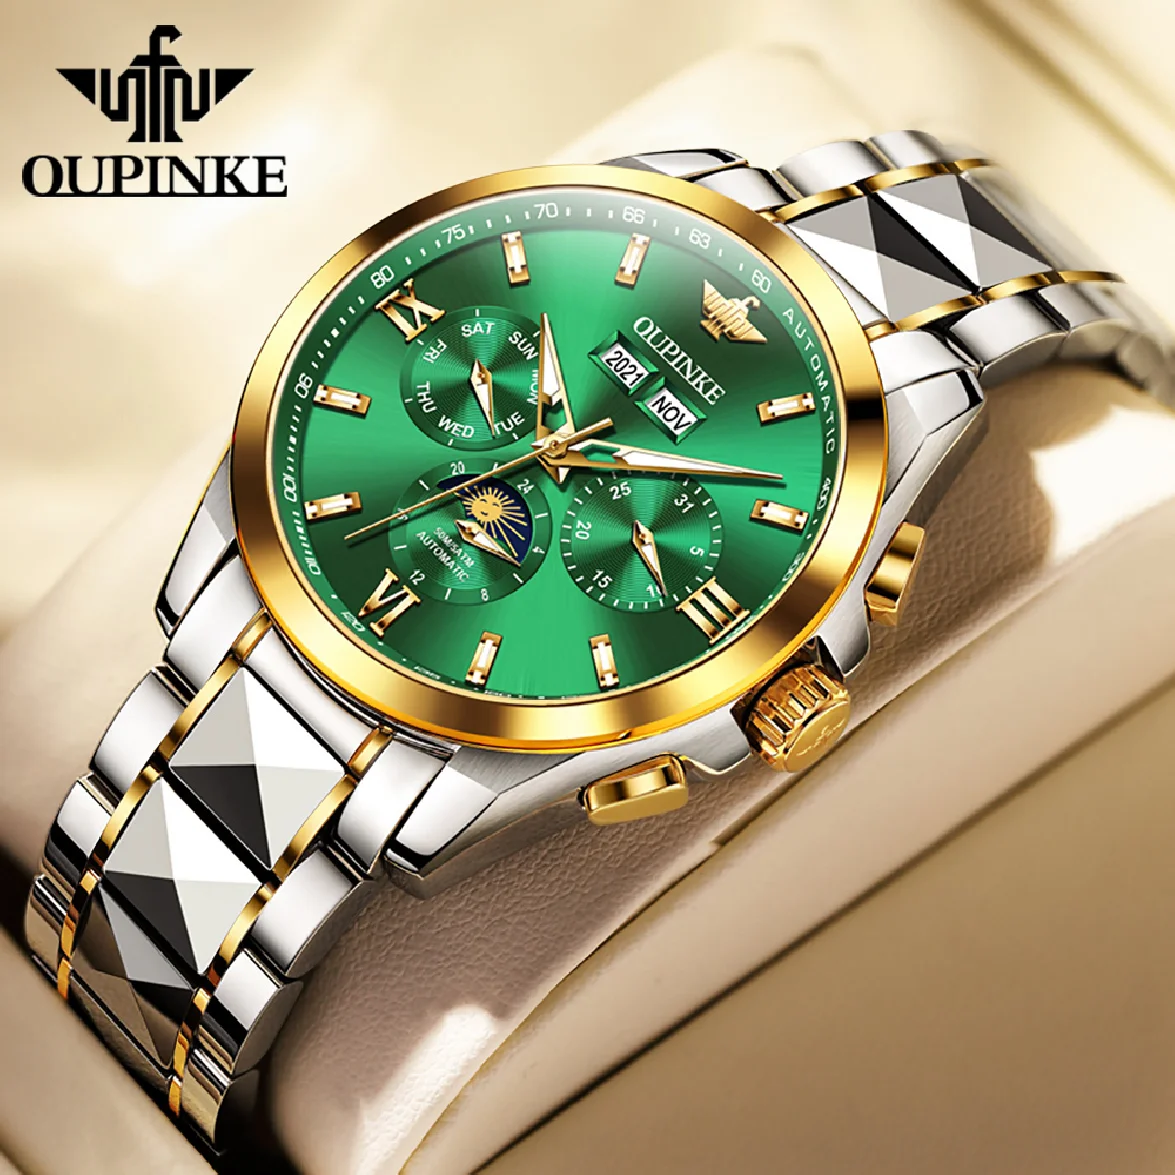 

OUPINKE Brand Luxury Automatic Watches for Men Mechanical Sapphire Crystal Waterproof Moon Phase Wristwatch Relogio Masculino